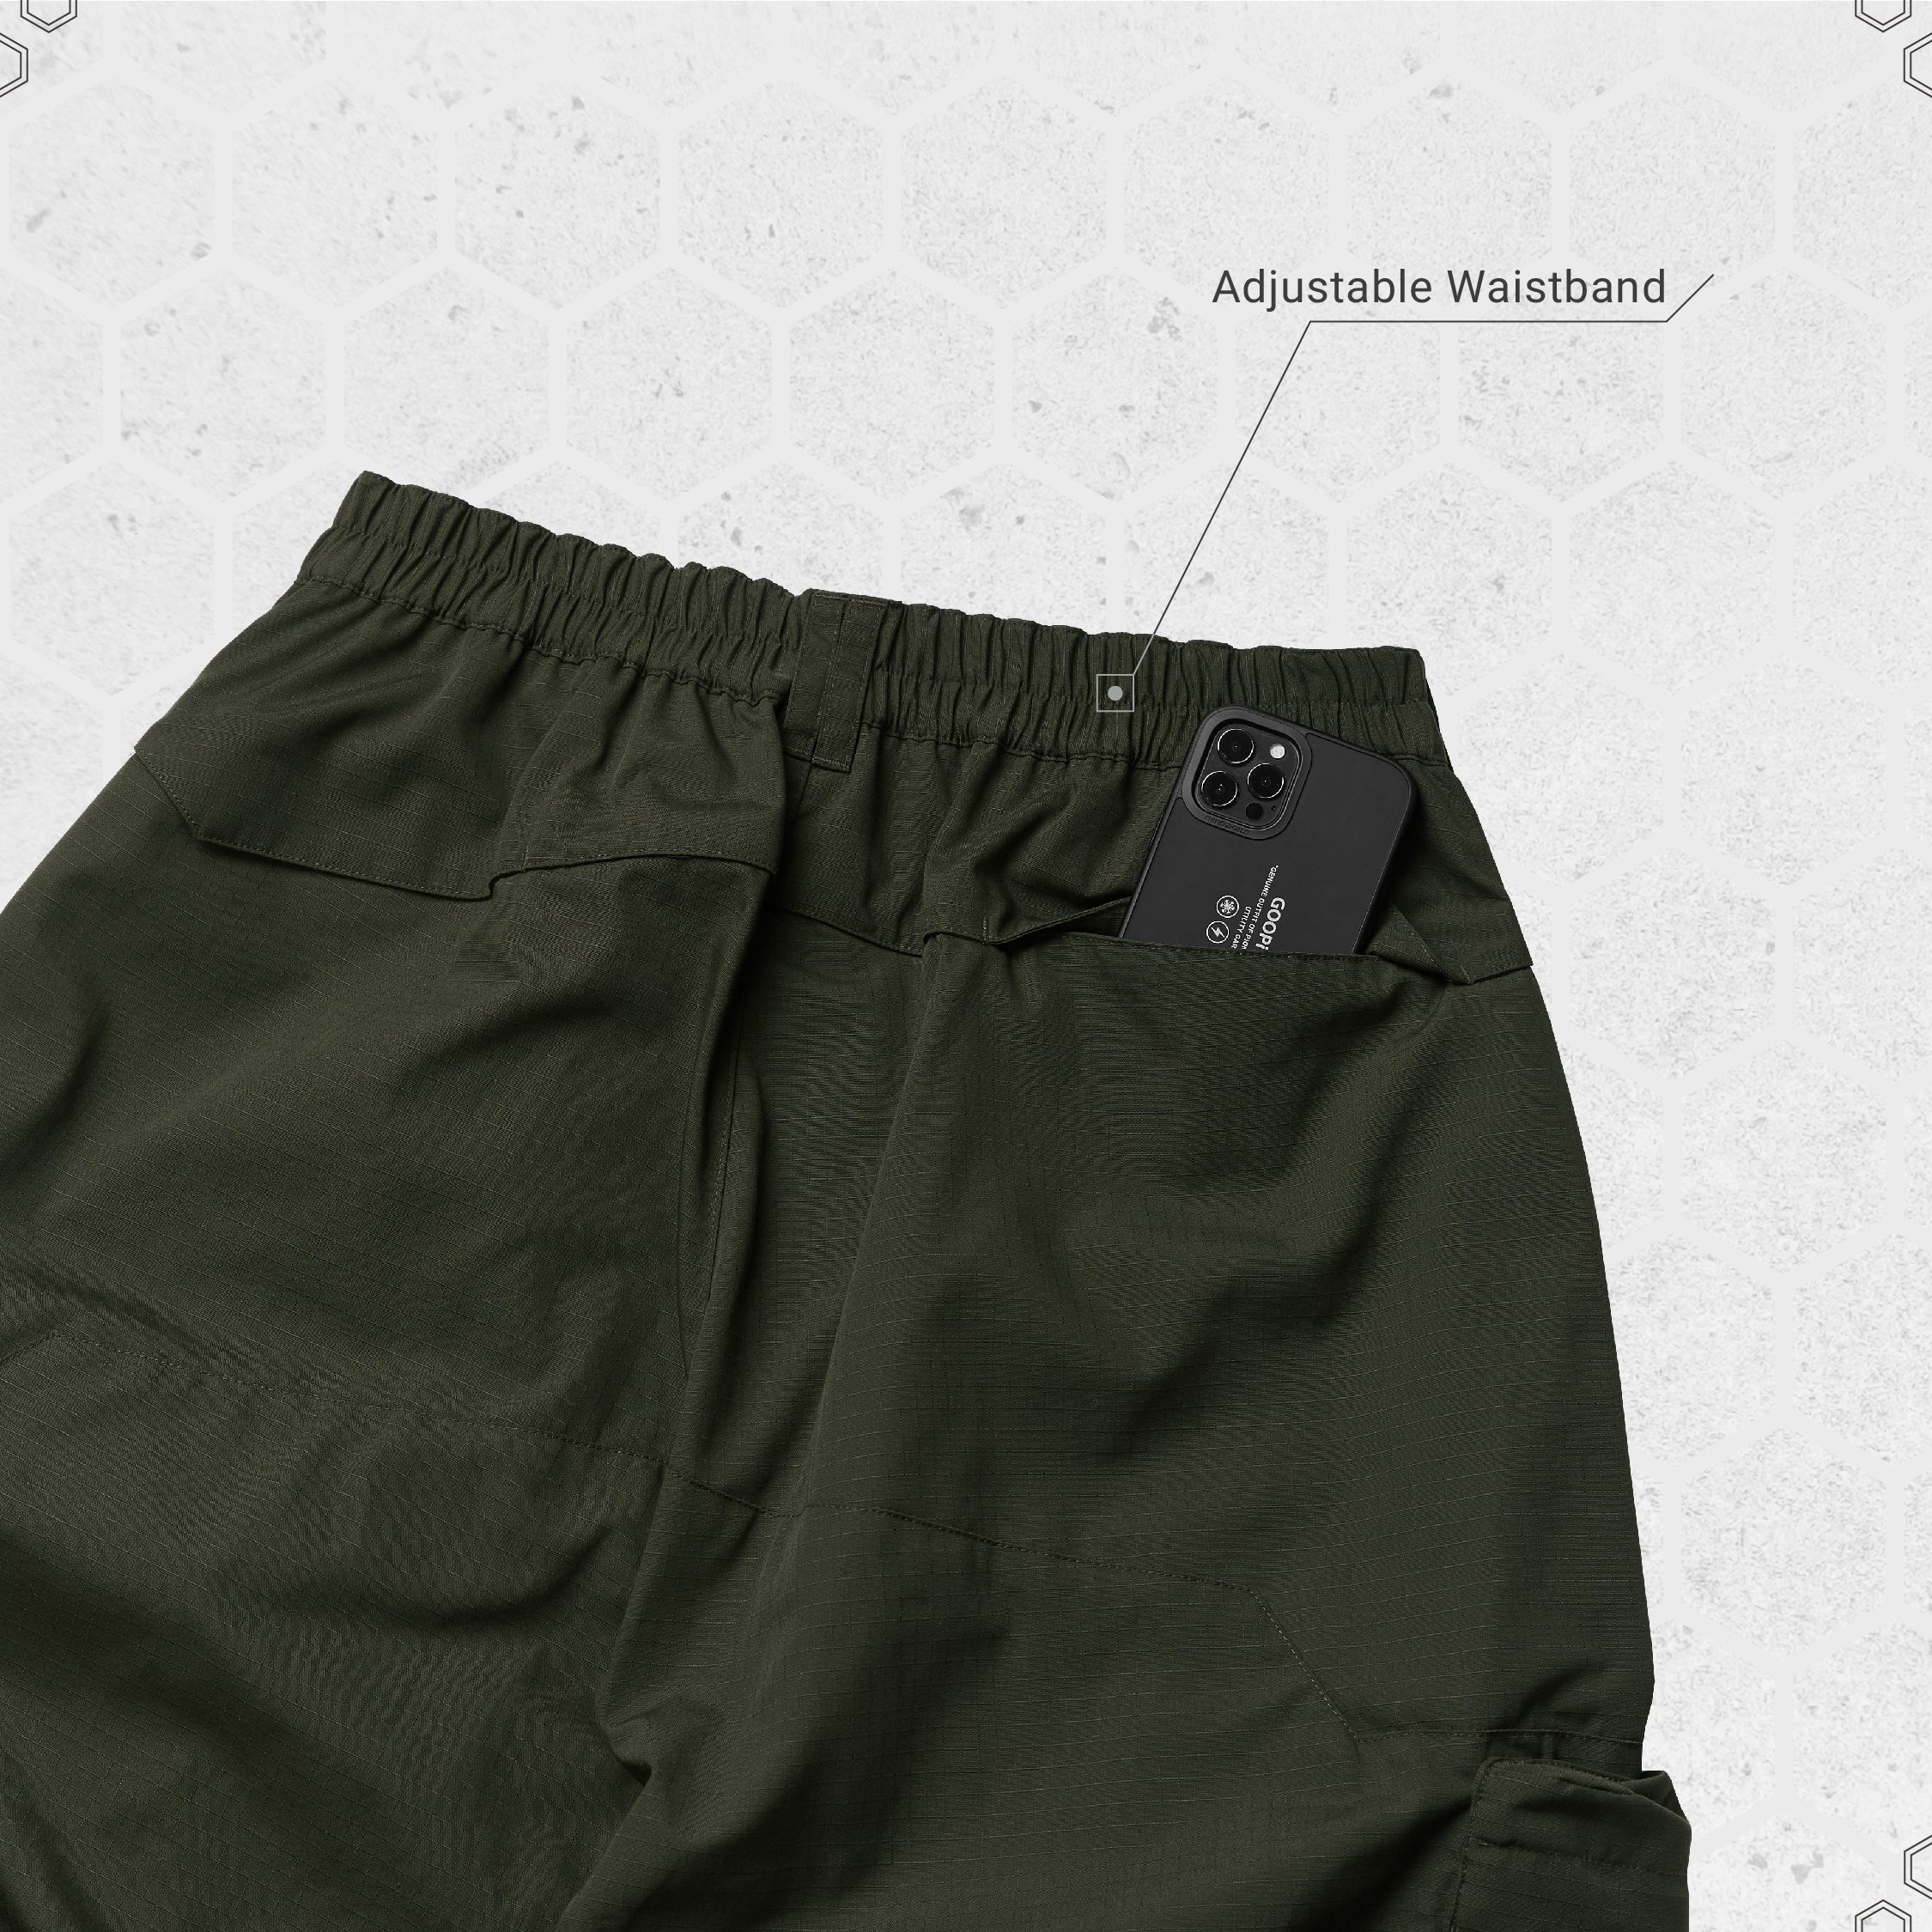 EVIH-03” Rough Ripstop Cargo Pants - Olive